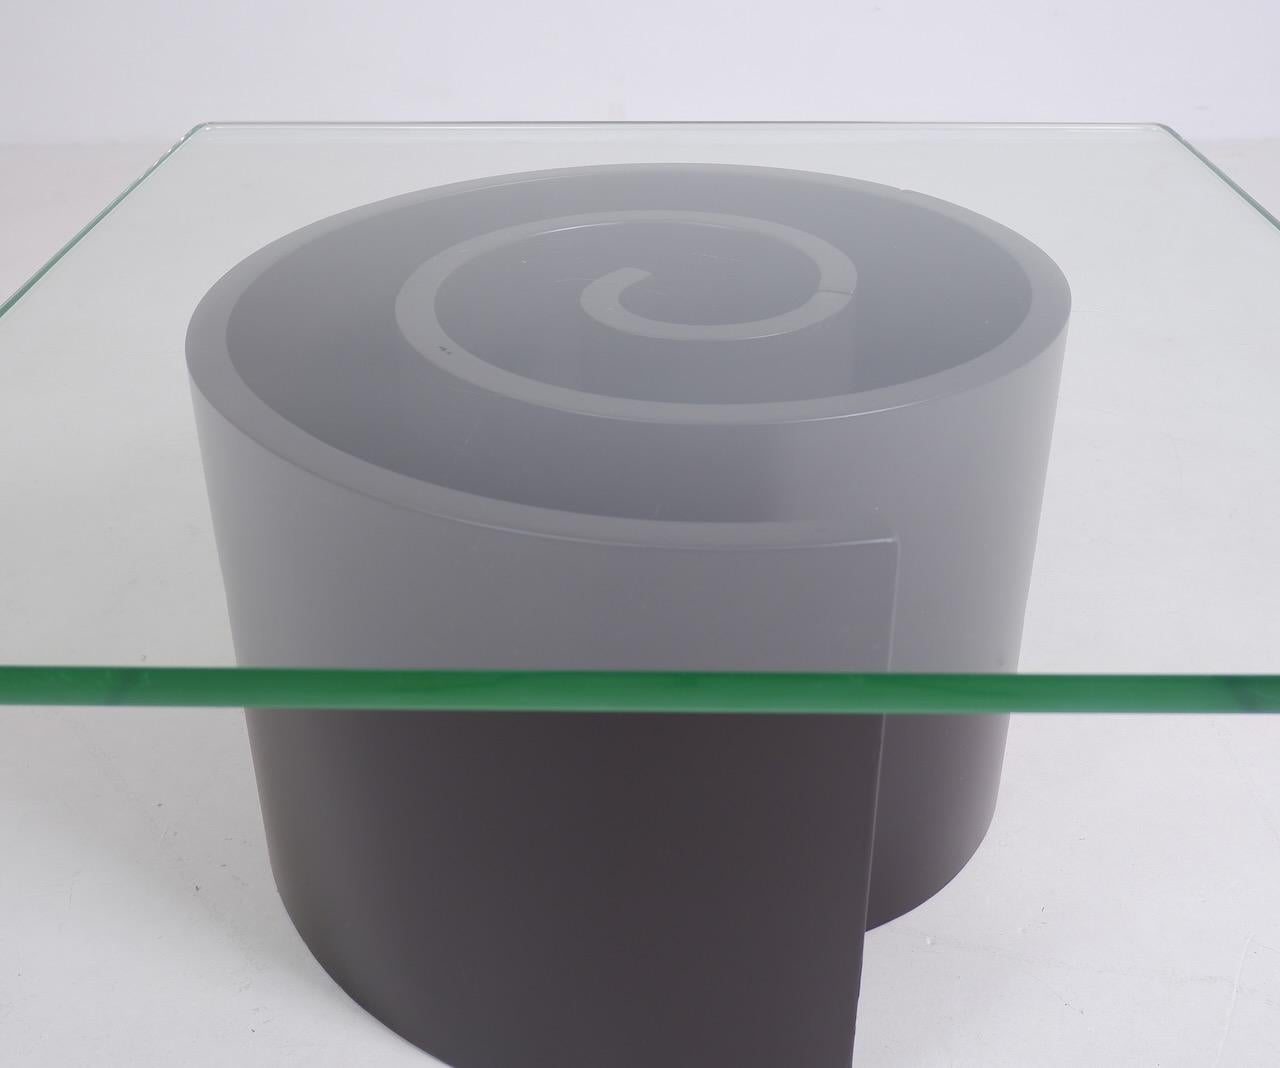 Spiralling Wood and Glass Coffee Table, circa 1970 In Fair Condition For Sale In Surbiton, GB